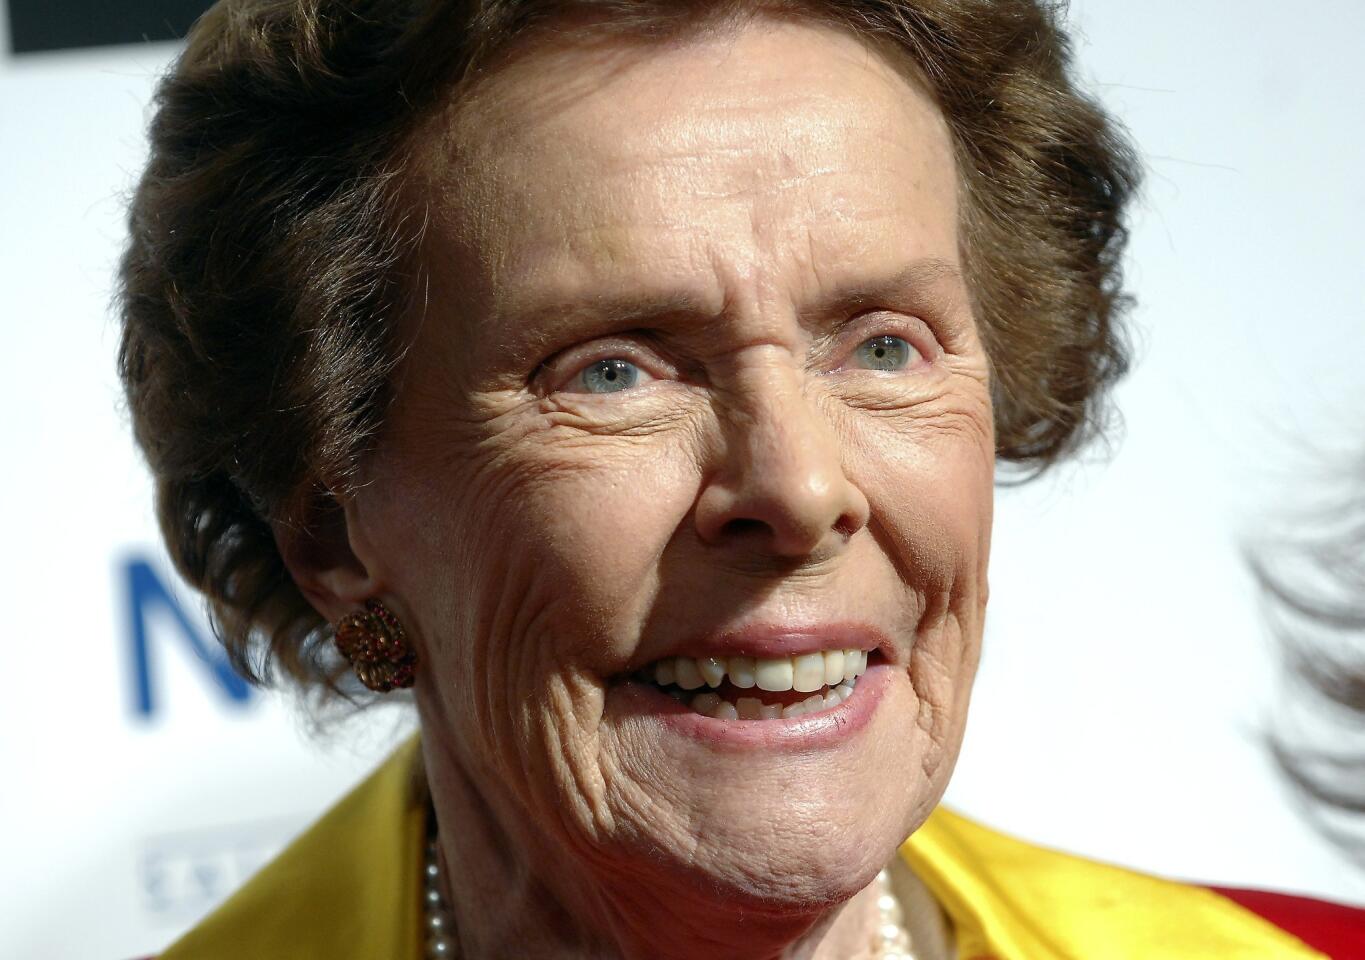 Ford Models co-founder Eileen Ford